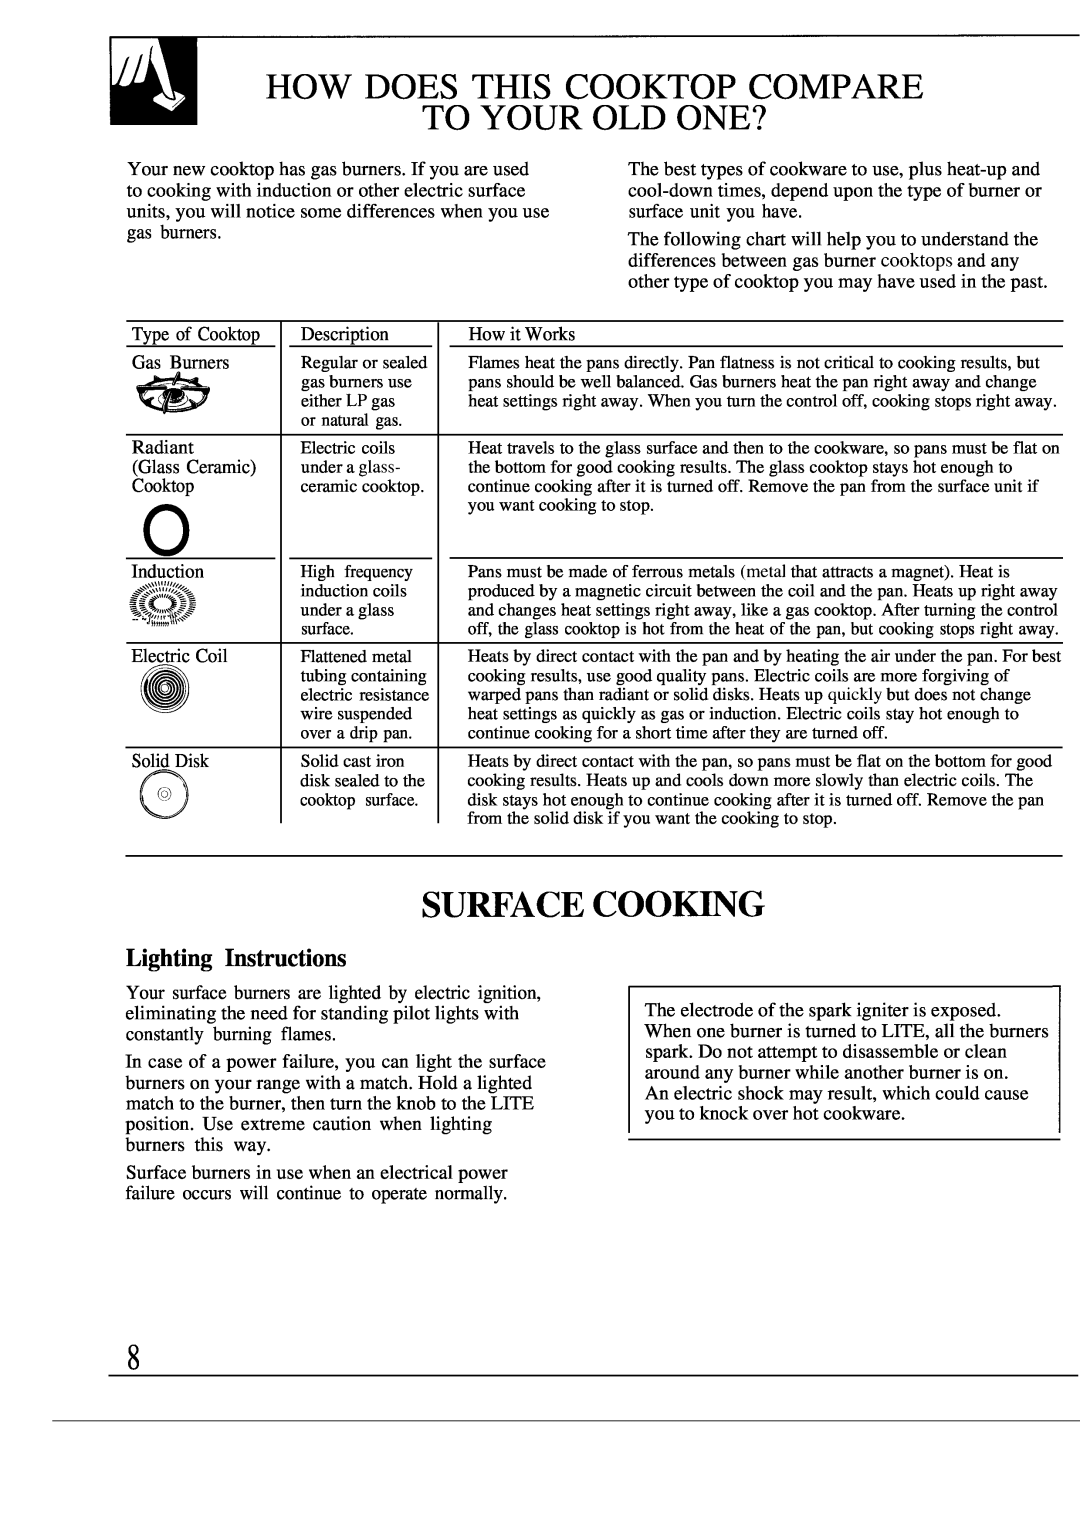 GE JGBP26, JG5P38, JG5P34 manual How Does This Cooktop Compare To Your Old One?, SUWACE COOmG, Lighting Instructions 